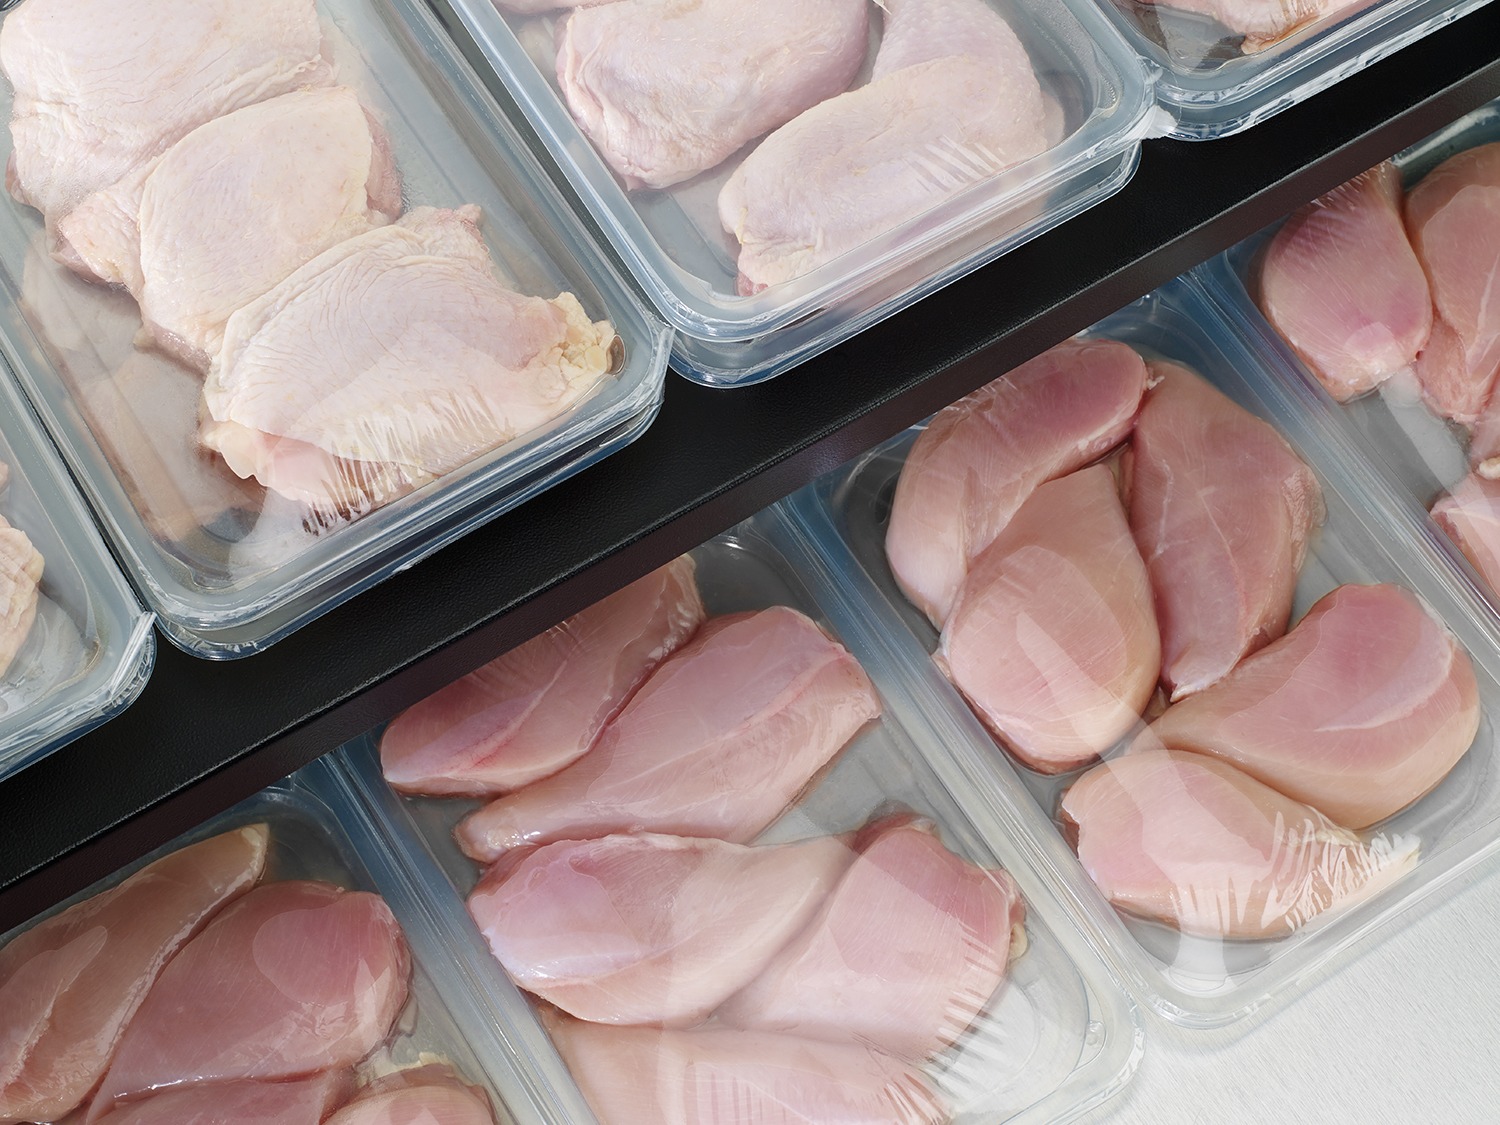 Thermoform Packaging of Poultry Products: Benefits and Best Practices